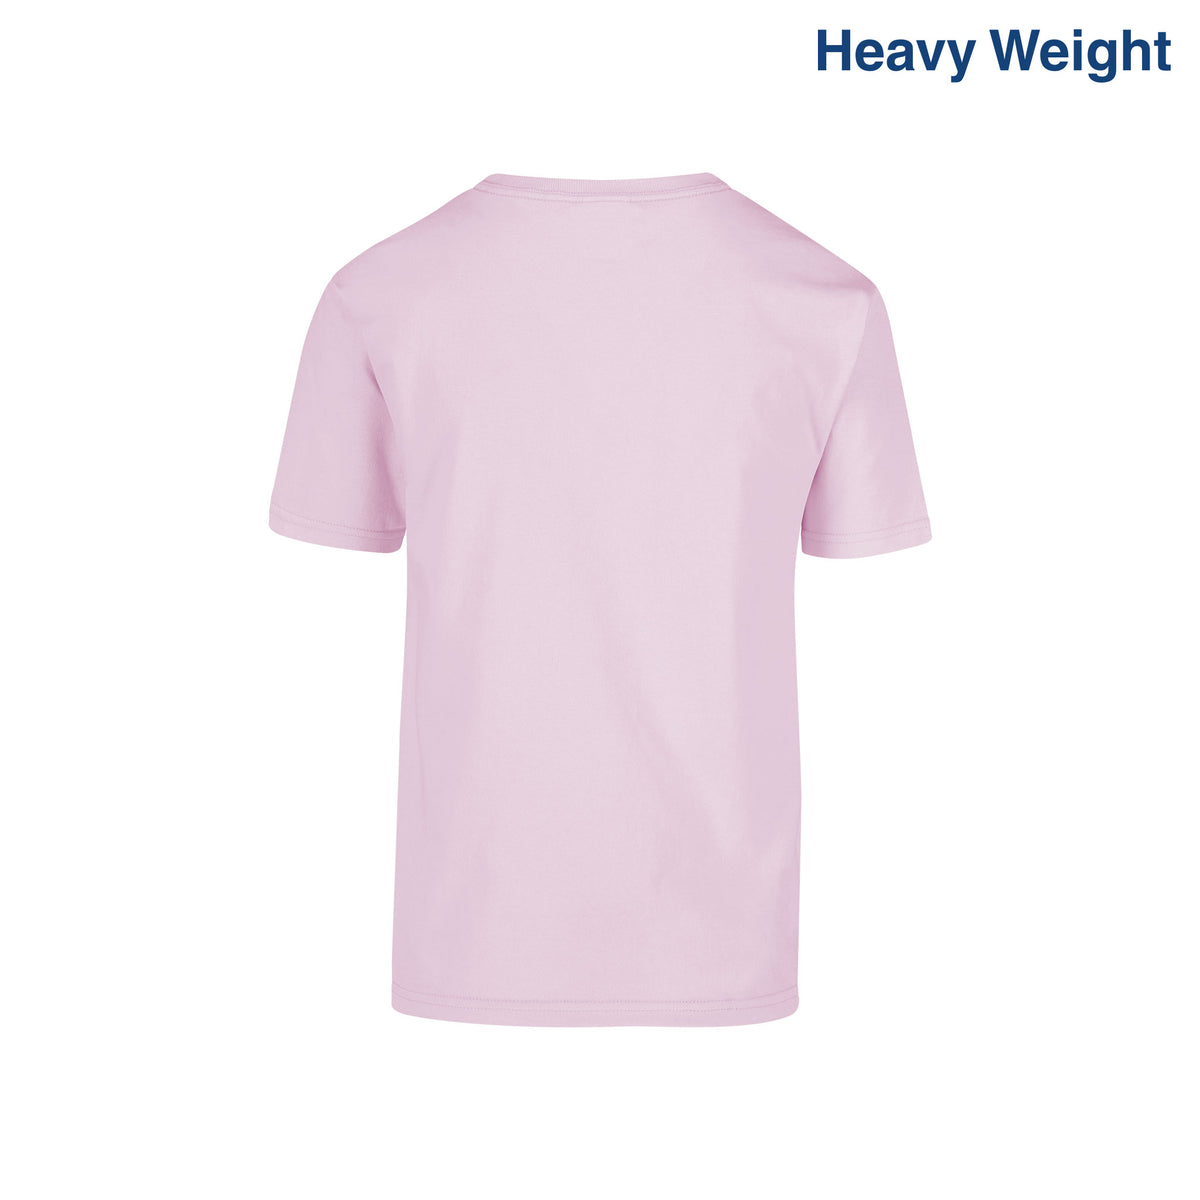 Youth’s Heavy Weight Crew Neck Short Sleeve T-Shirt (Light Pink ...